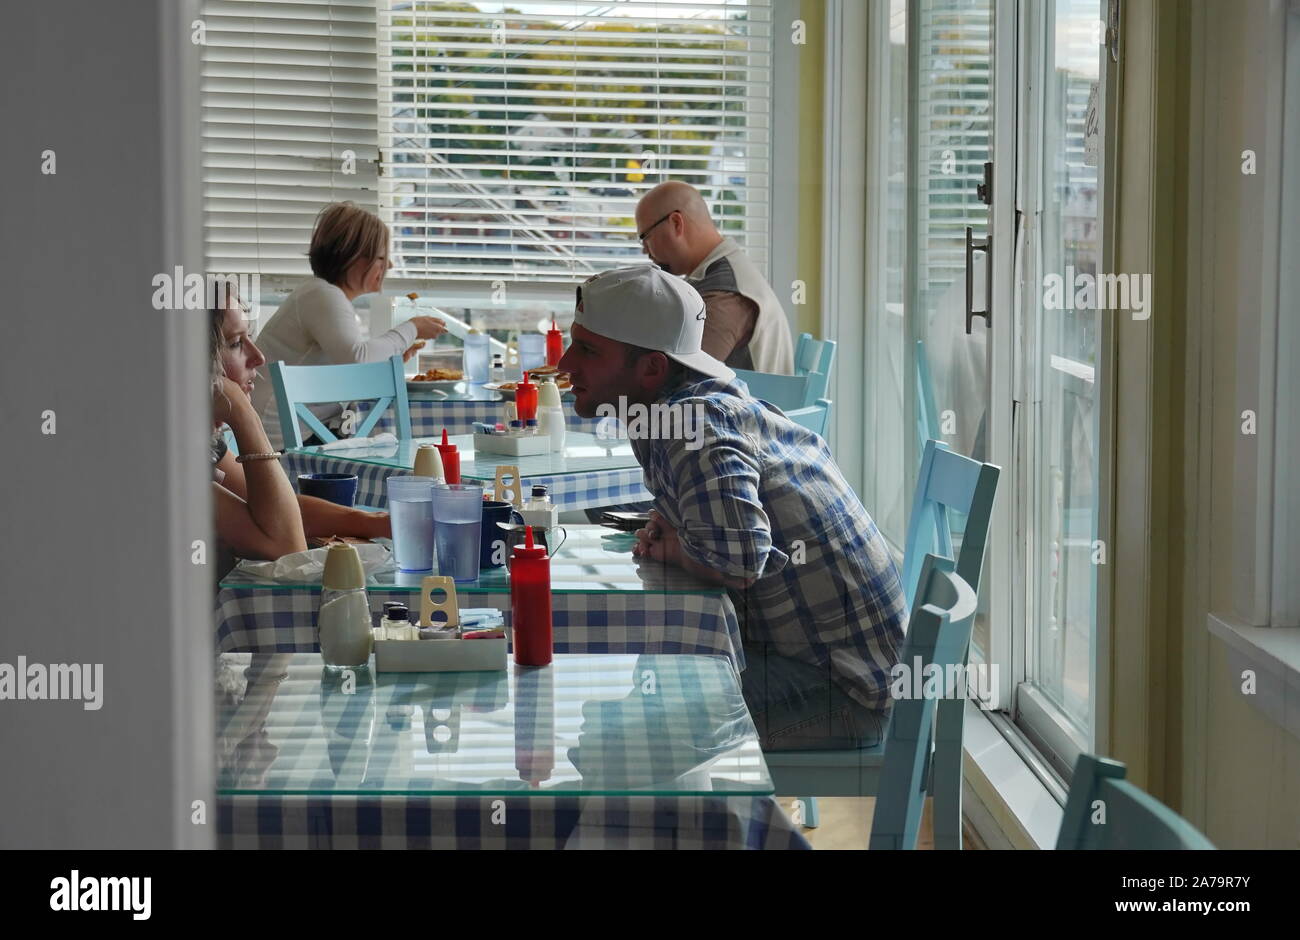 Boothbay Harbor, ME / USA - October 19, 2019: Young adult and middle aged caucasian couples eating brunch at a local restaurant Stock Photo